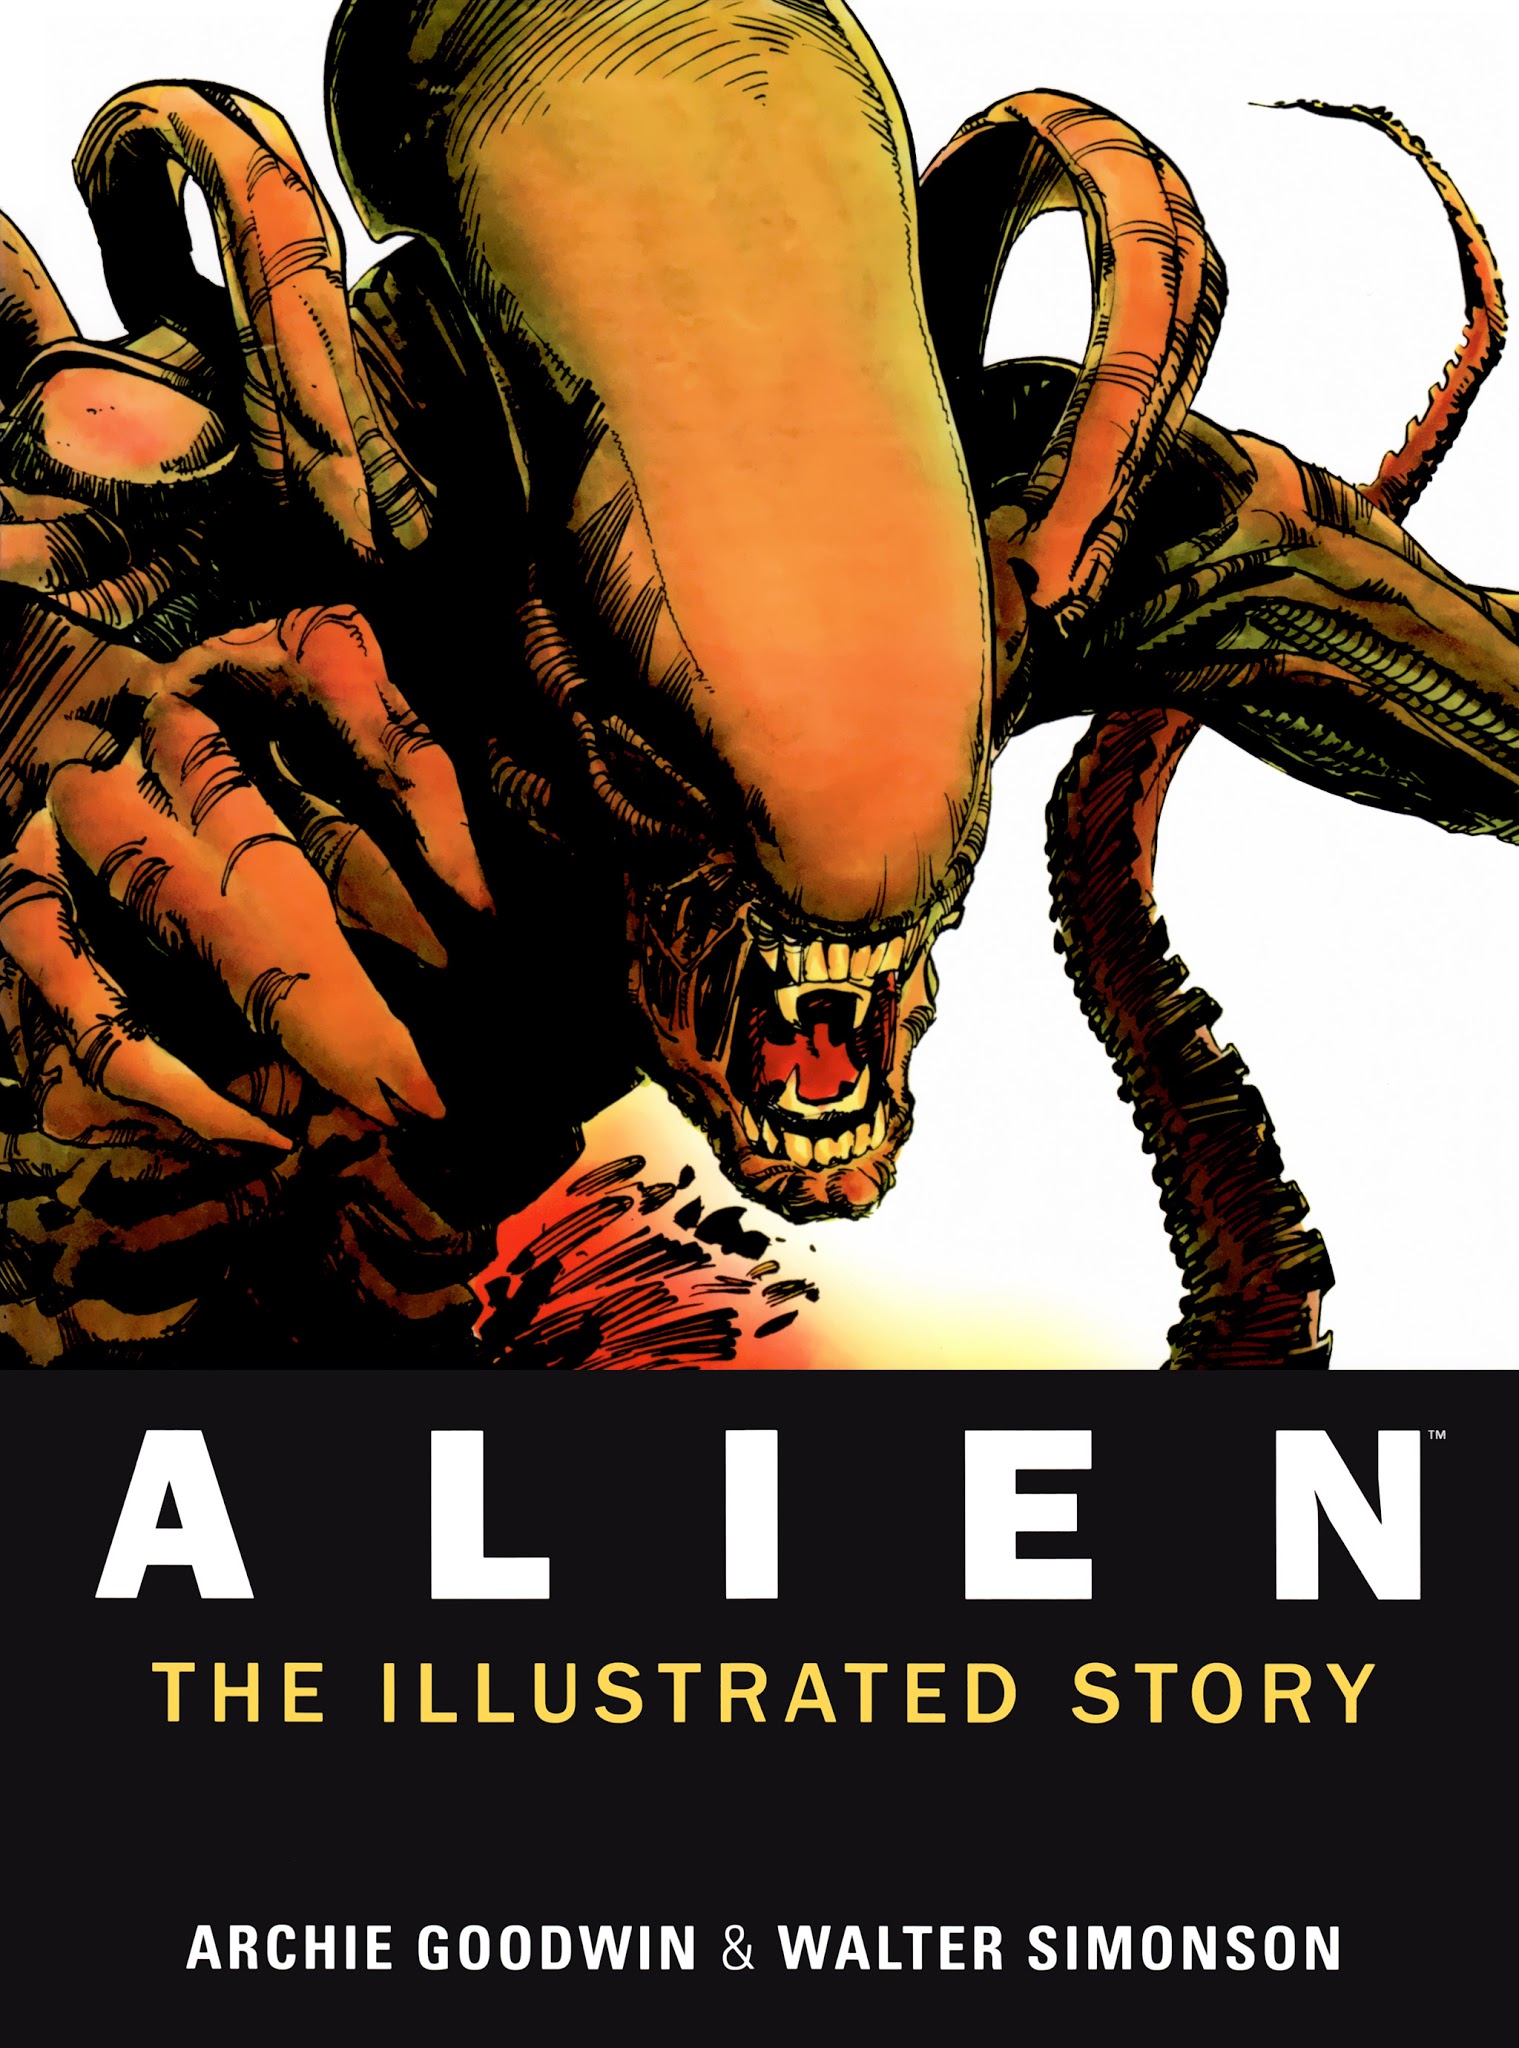 Read online Alien: The Illustrated Story comic -  Issue # TPB - 1